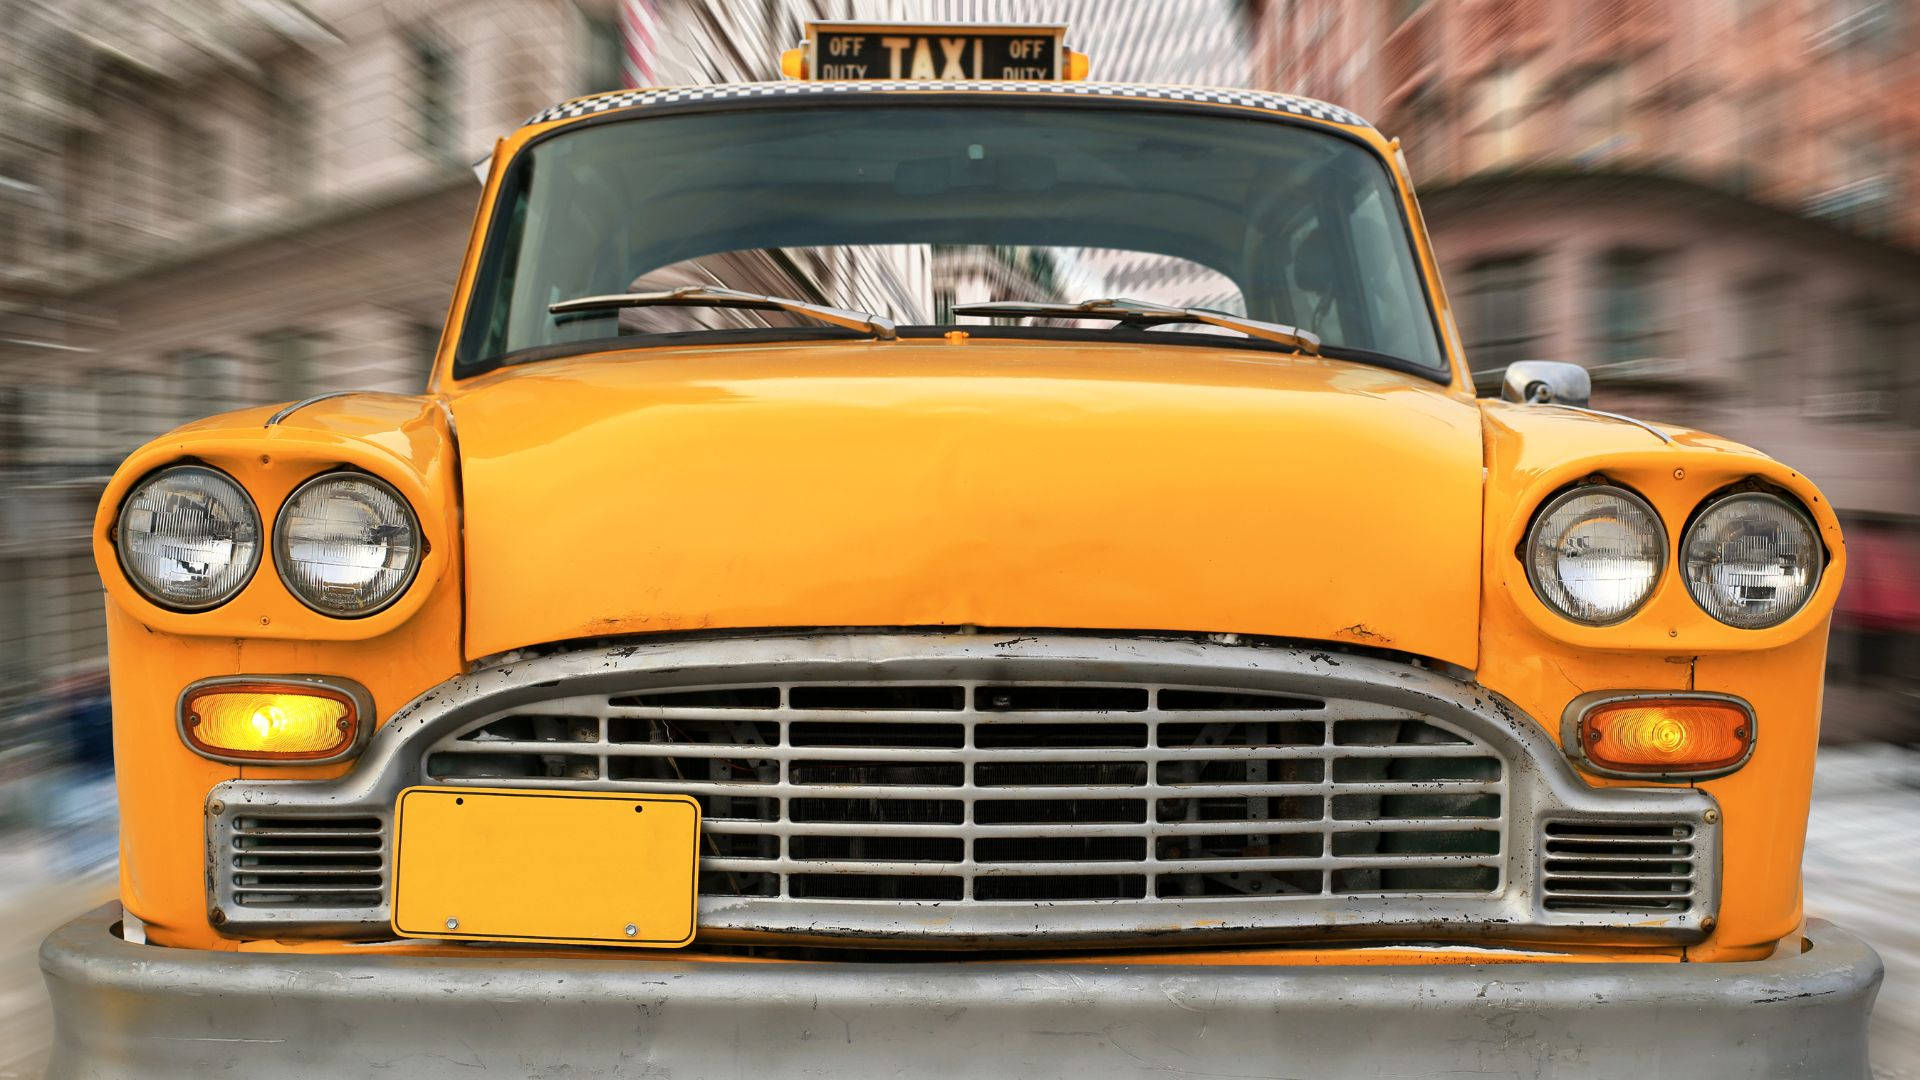 Old Fashioned Taxi Front View Wallpaper